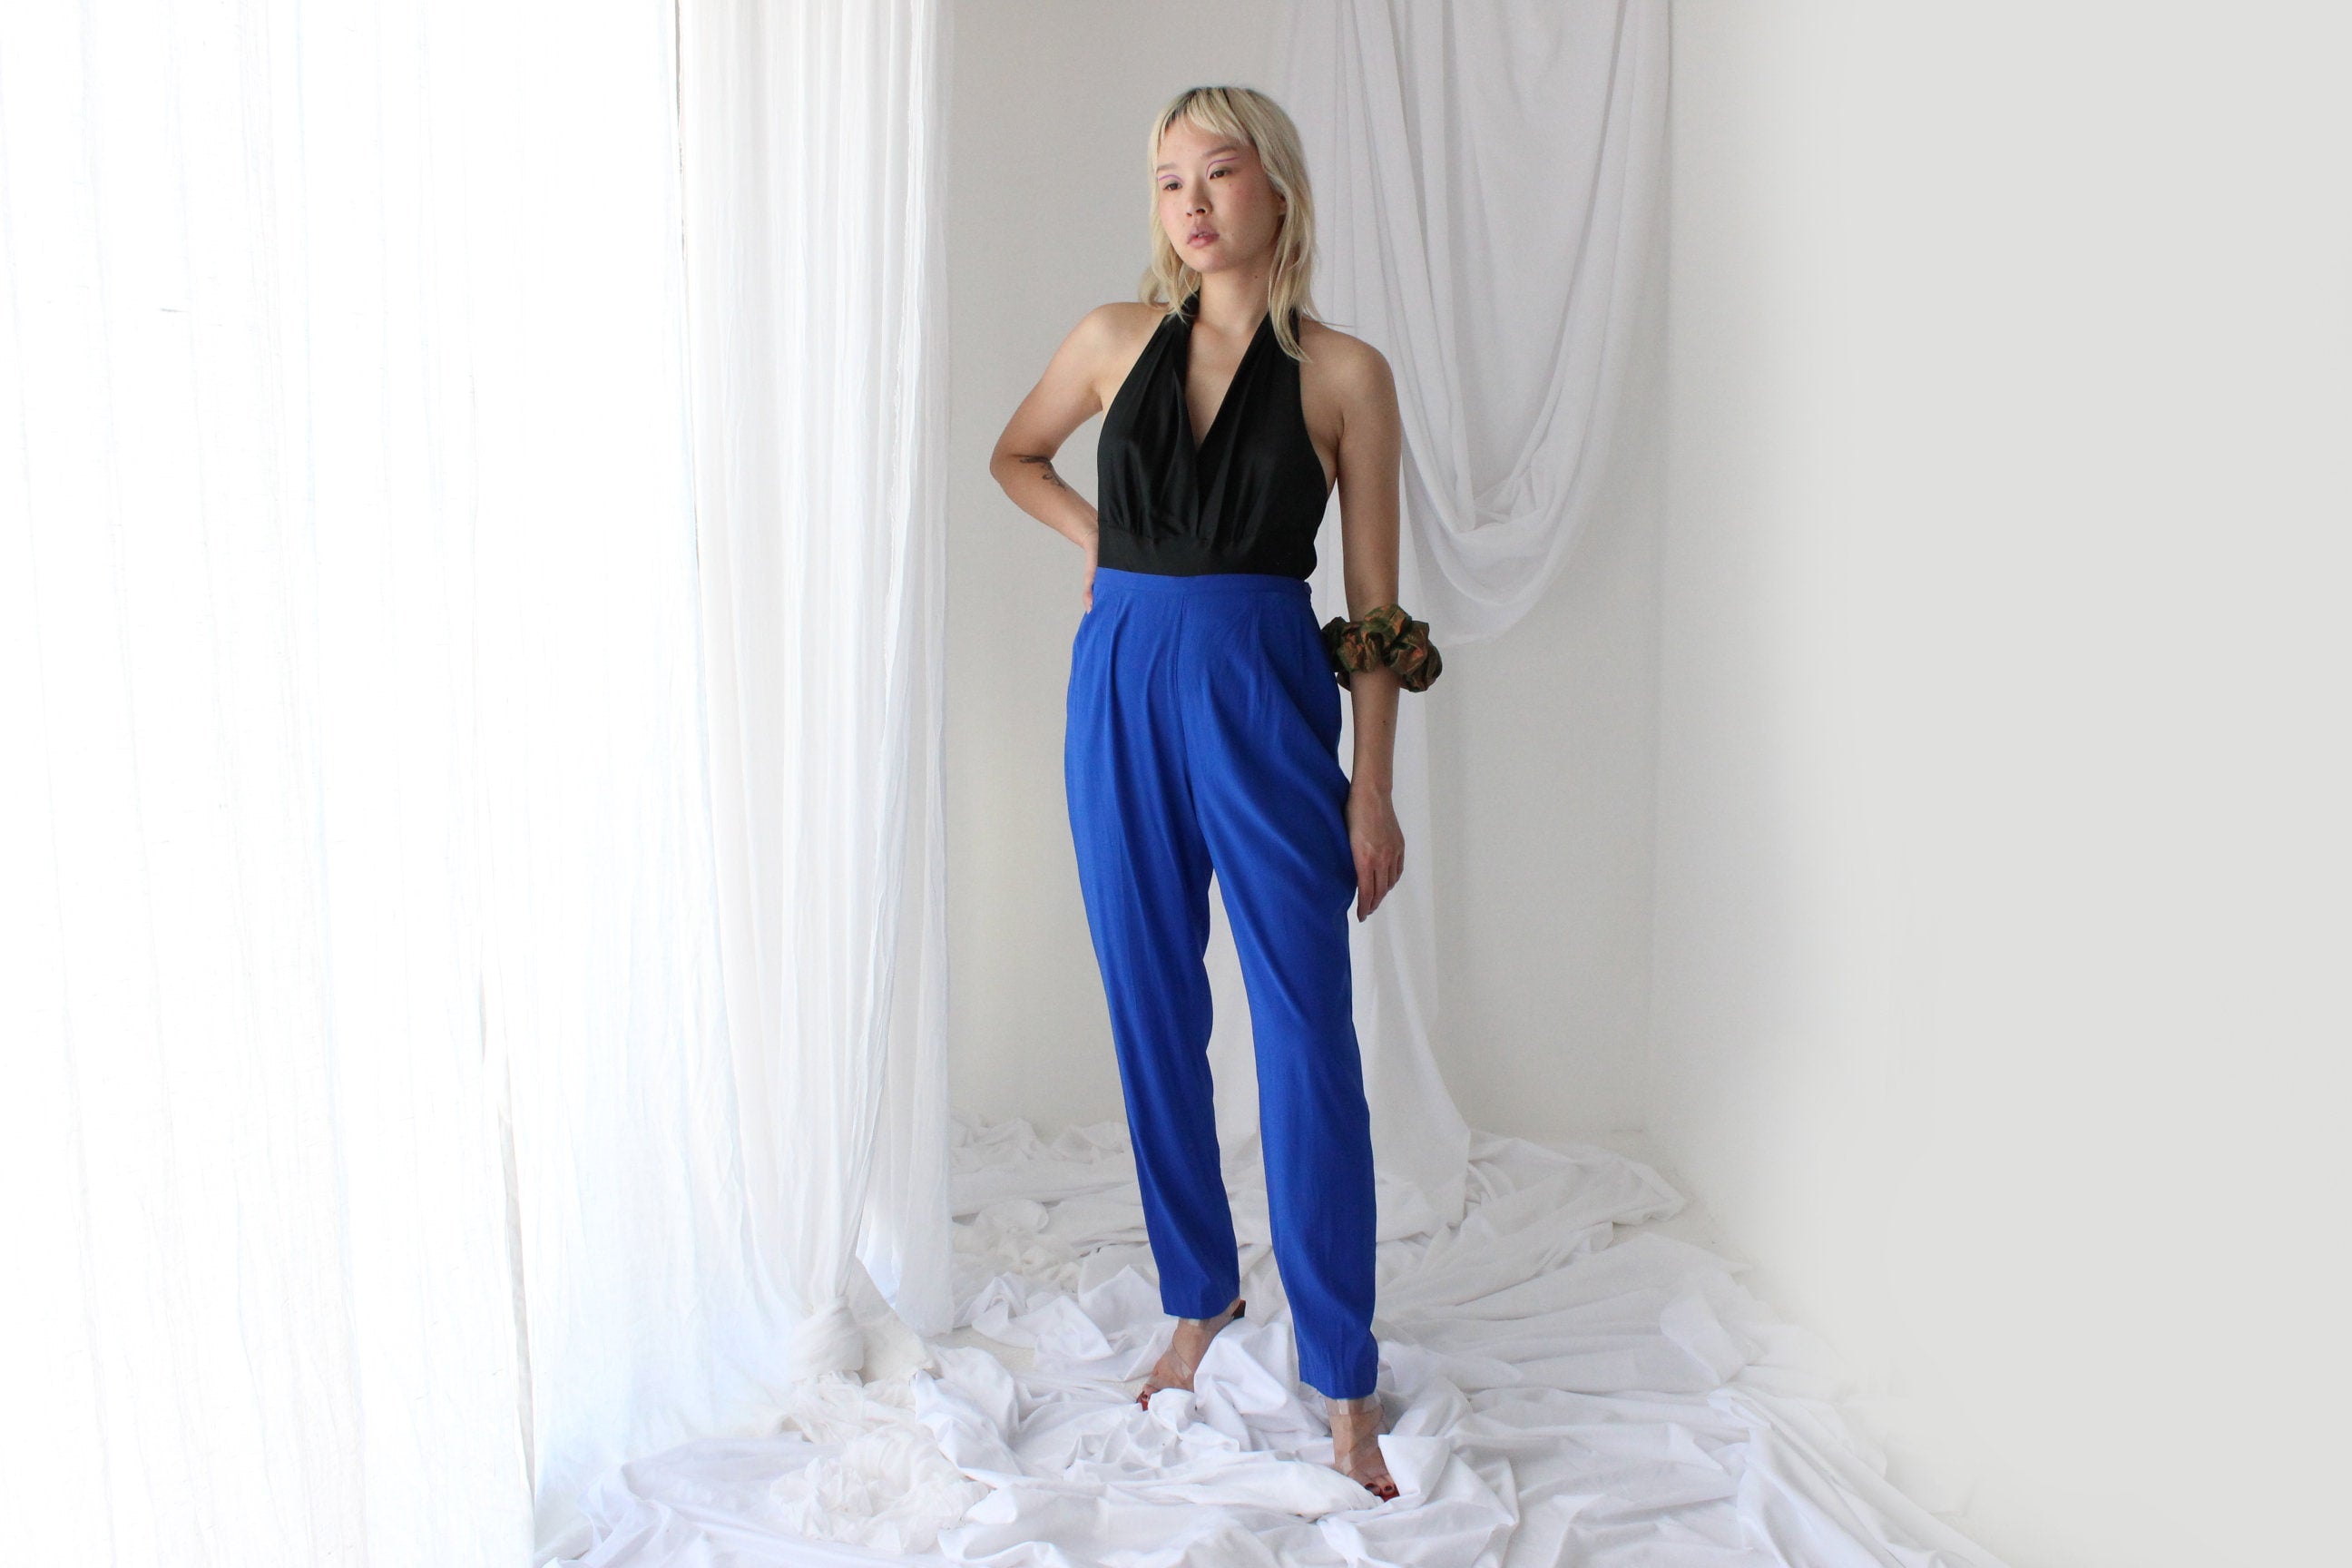 80s Pure Silk Cobalt Blue Relaxed Tapered Trousers